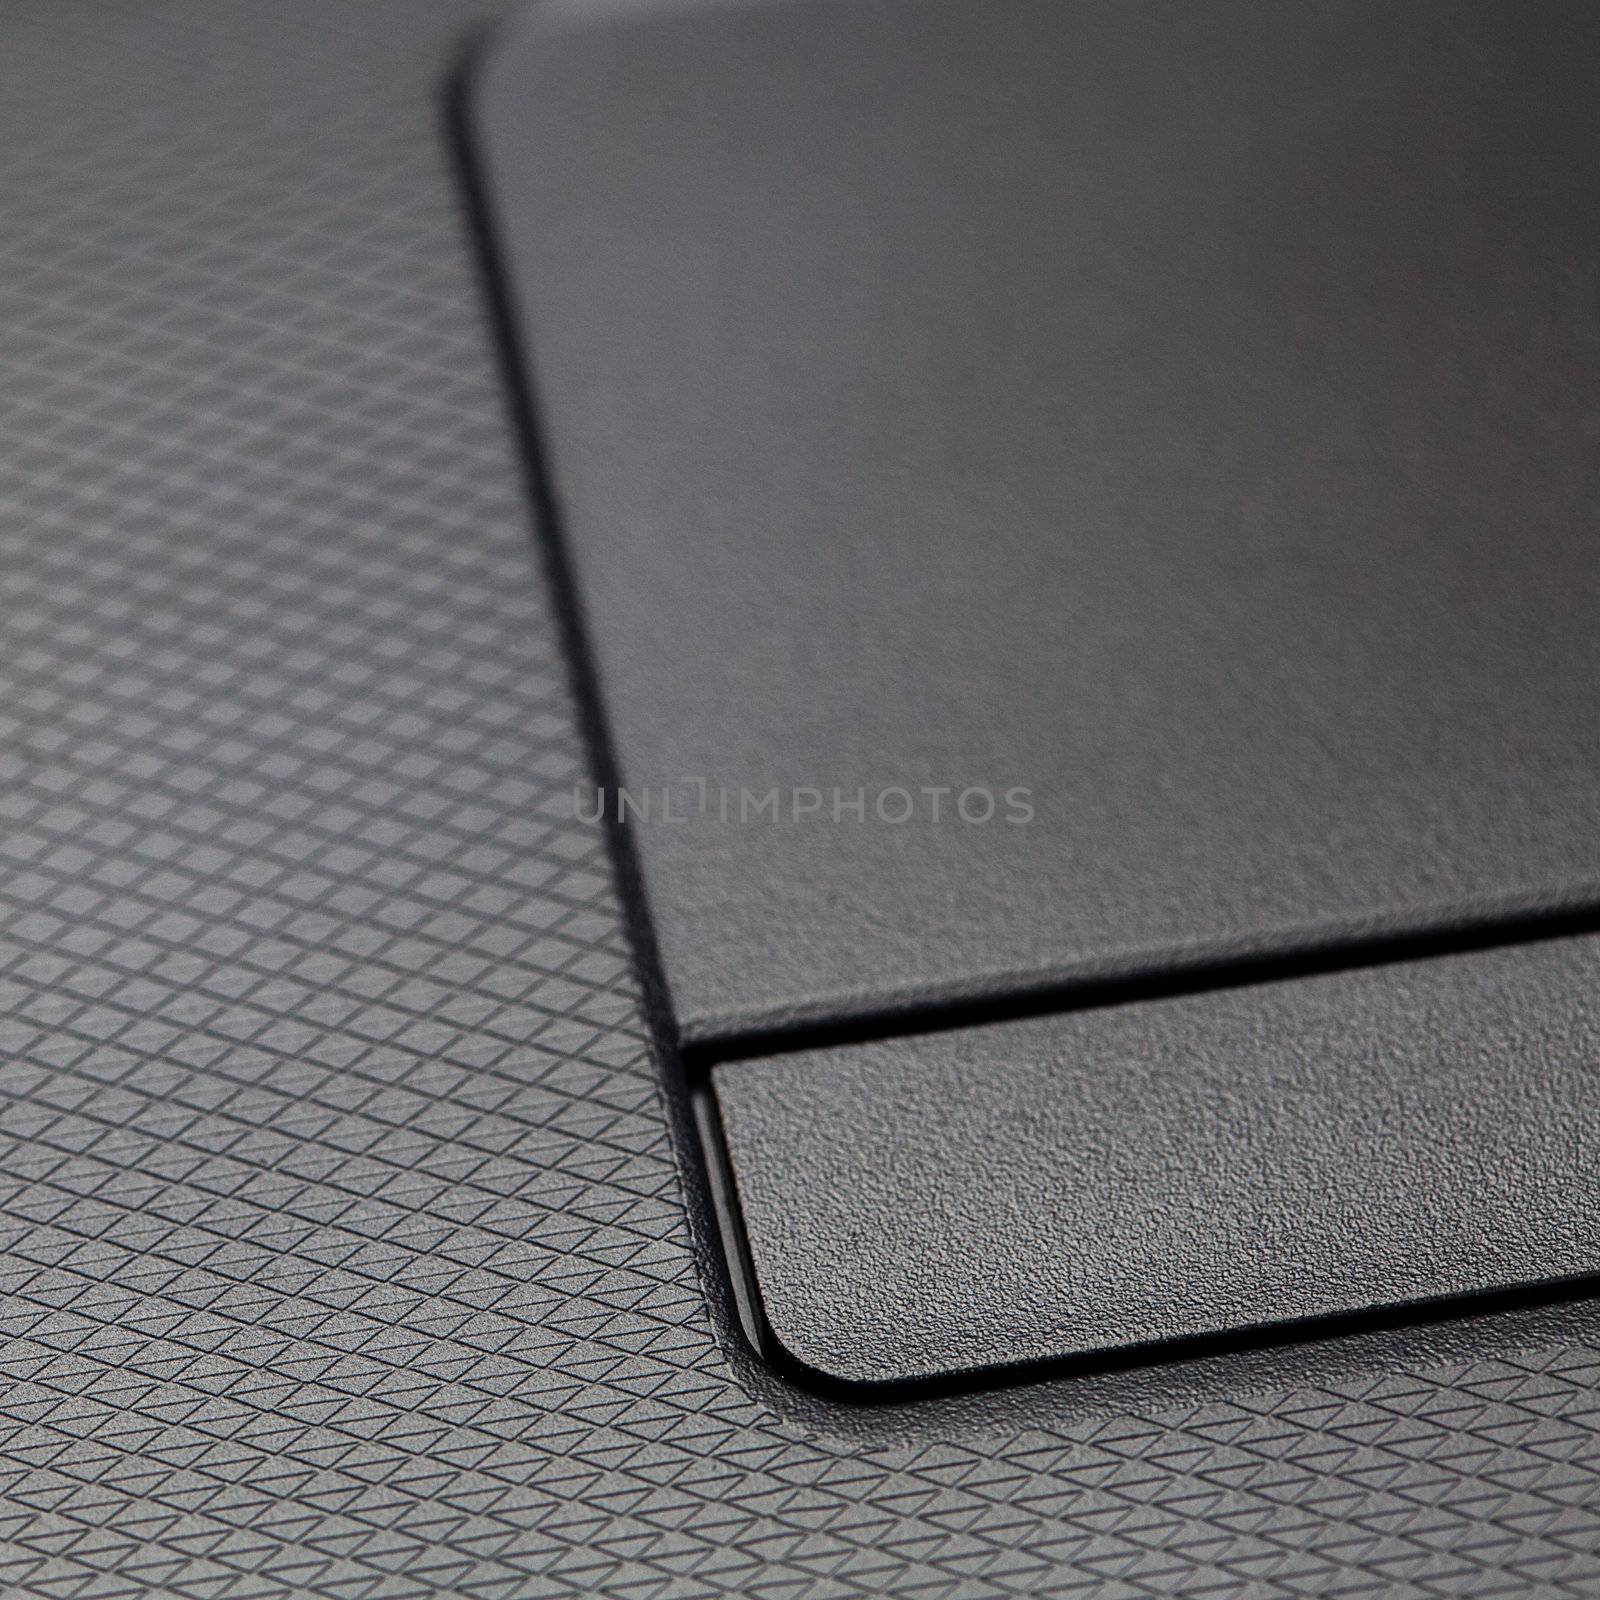 touchpad and keyboard laptop close-up by jannyjus